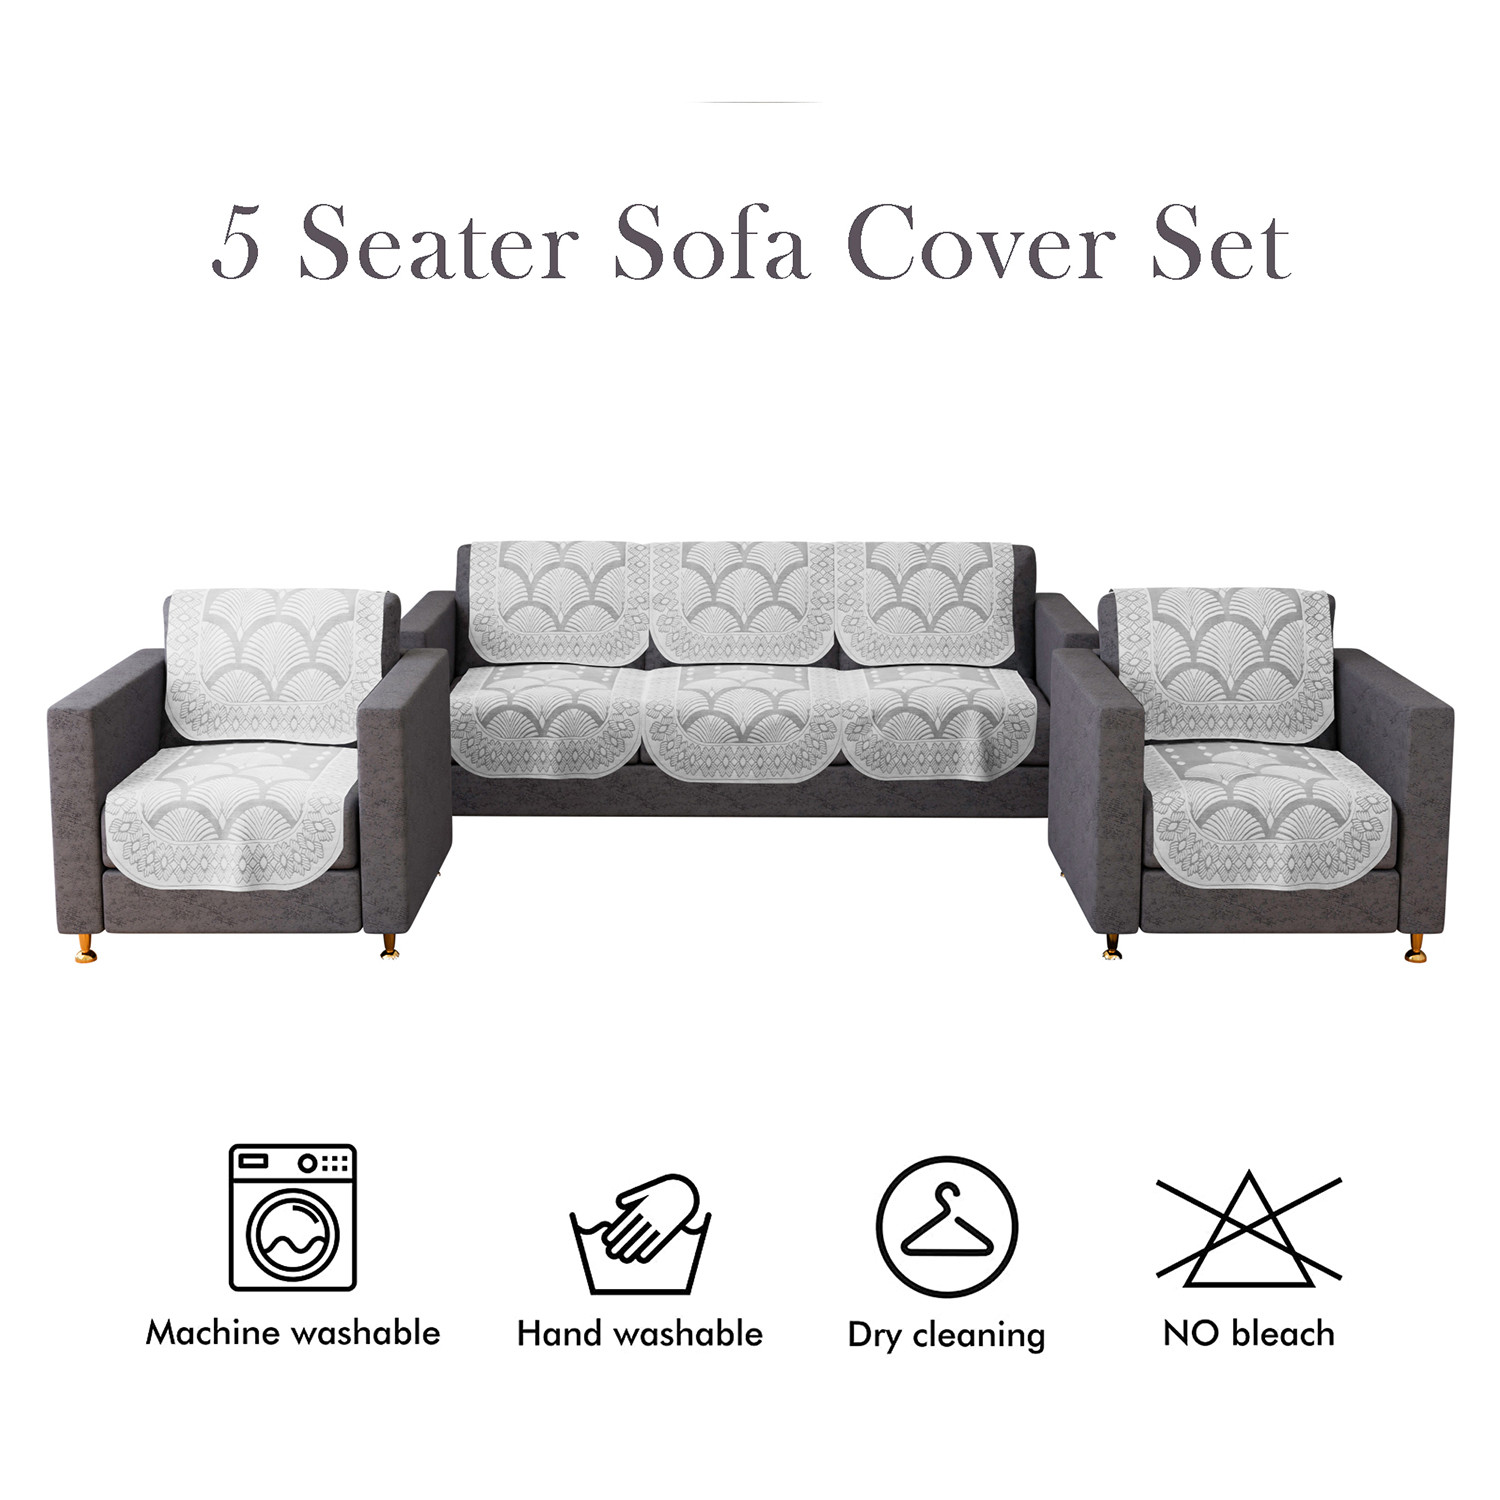 Kuber Industries Sofa Cover | Cotton Net Rainbow Sofa Cover | 5-Seater Sofa Cover for Home Decor | Sofa cover Set for Living room | White